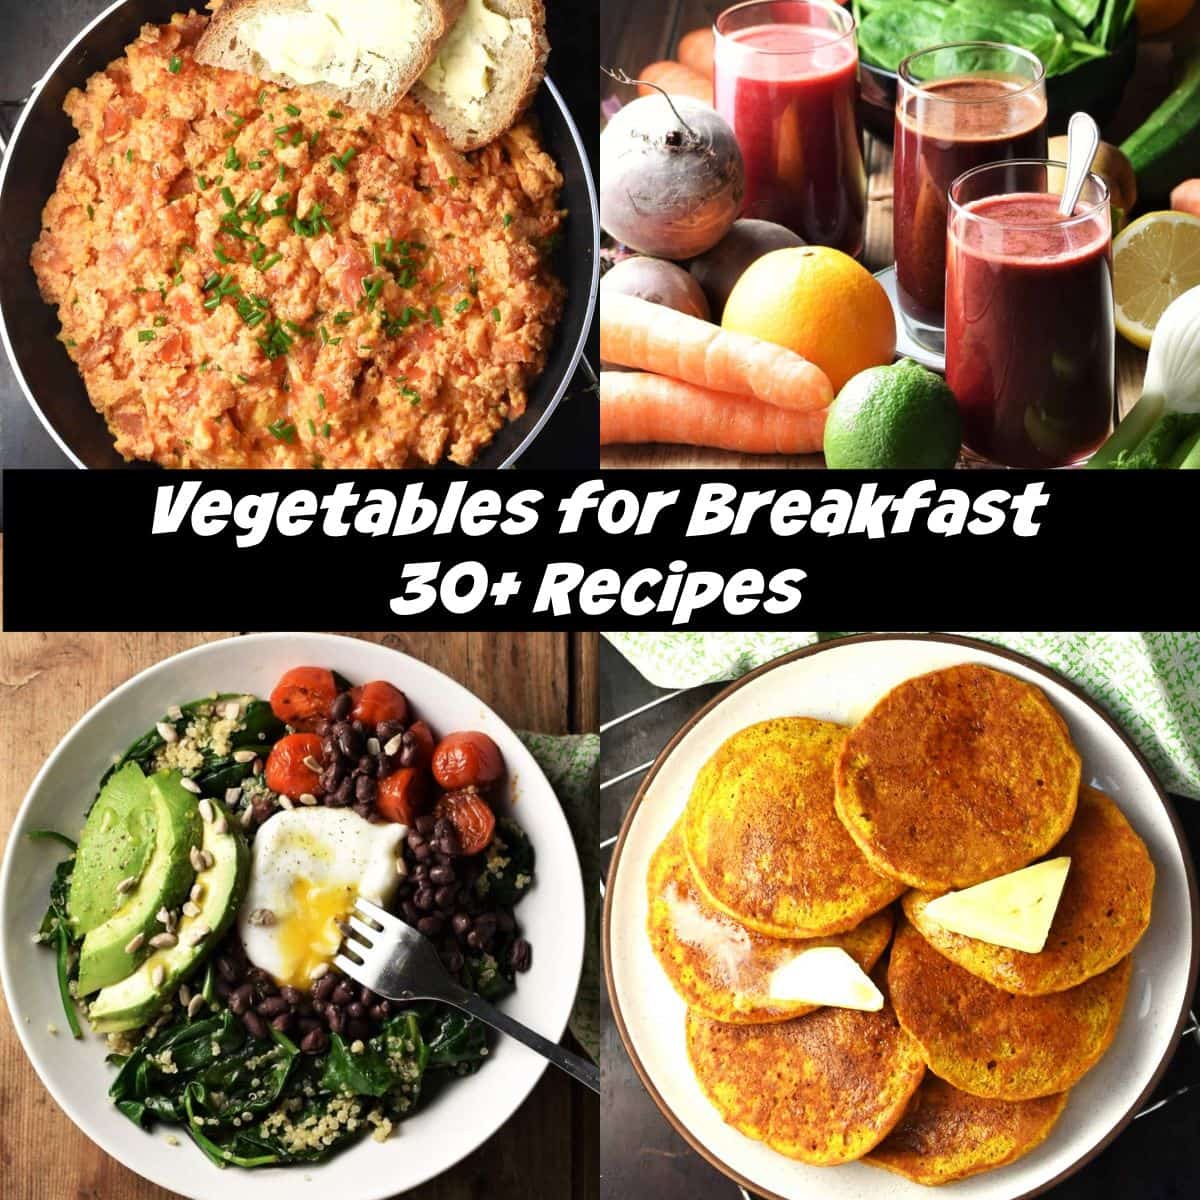 Top down view of 4 images of vegetables for breakfast dishes including scrambled eggs, vegetable juice, vegetable breakfast bowl and pancakes.